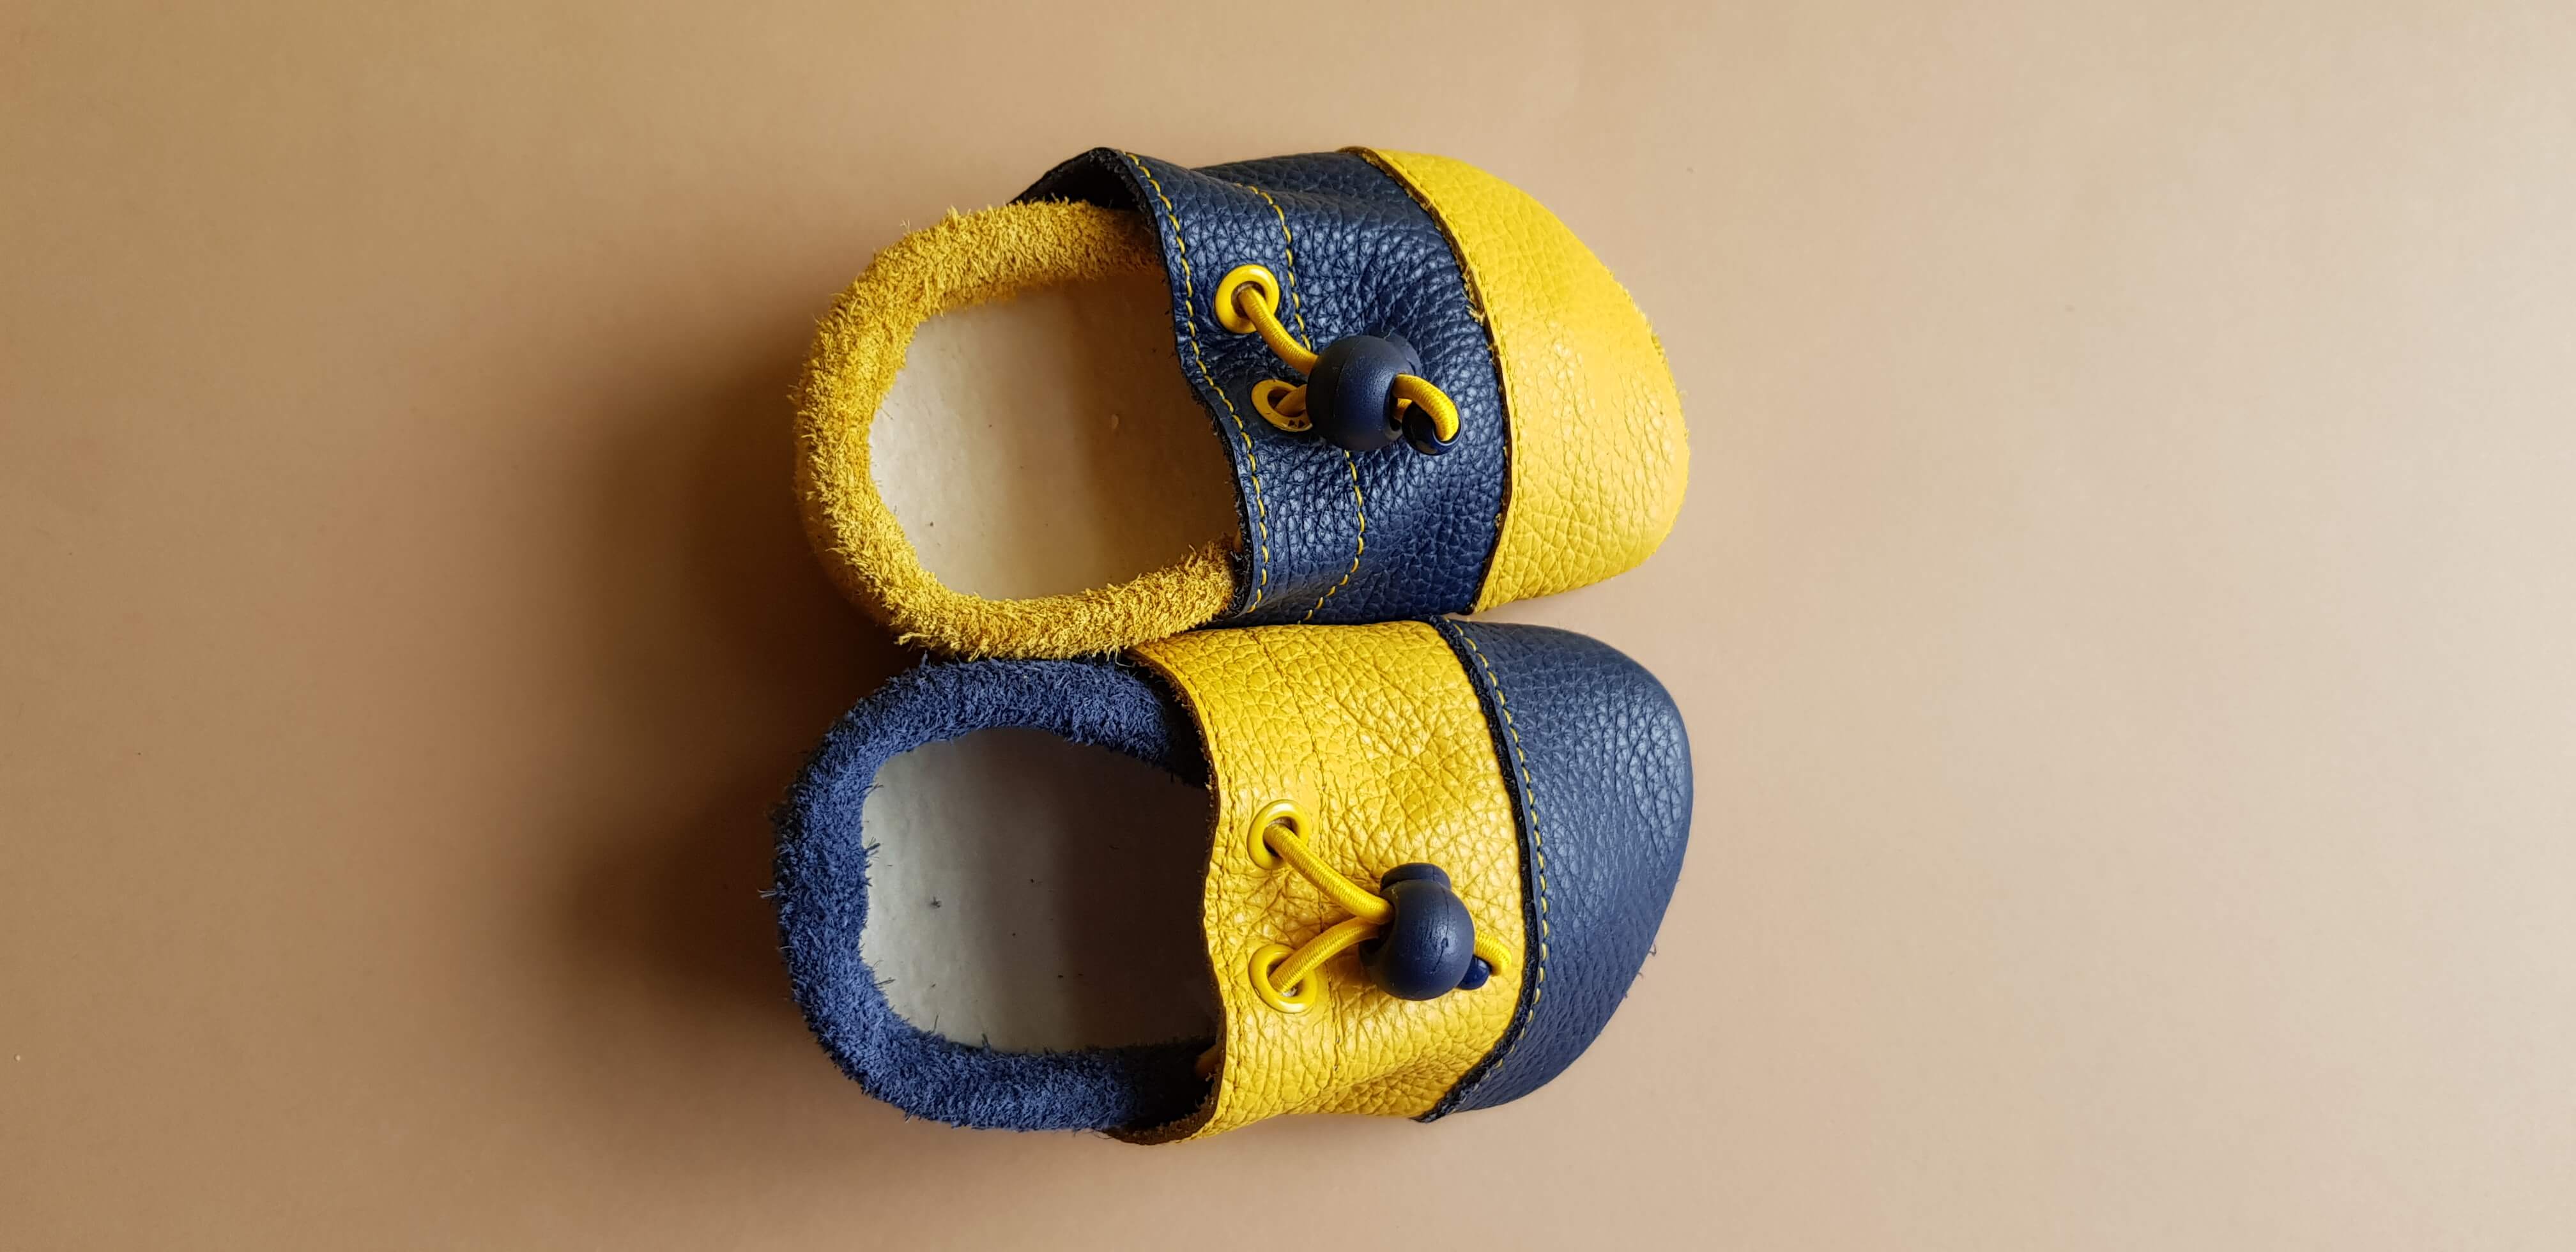 Indoor/Outdoor Soft Sole Slippers - Mix Yellow and Navy